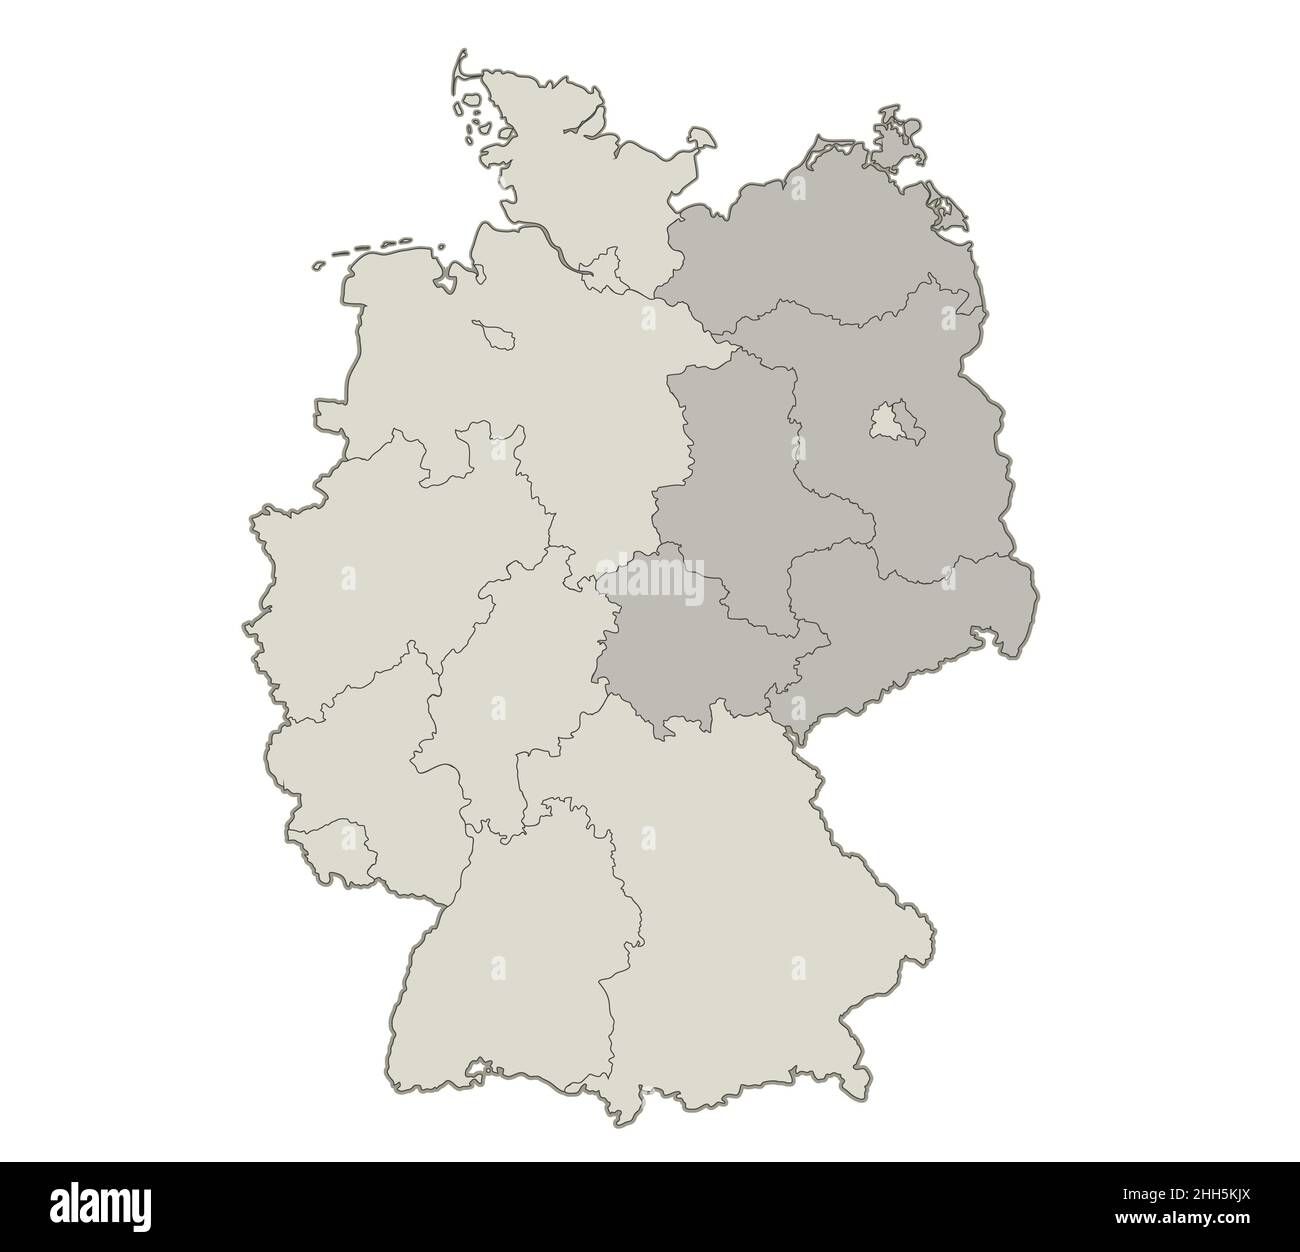 Germany map divided on West and East Germany with regions map, blank Stock Photo